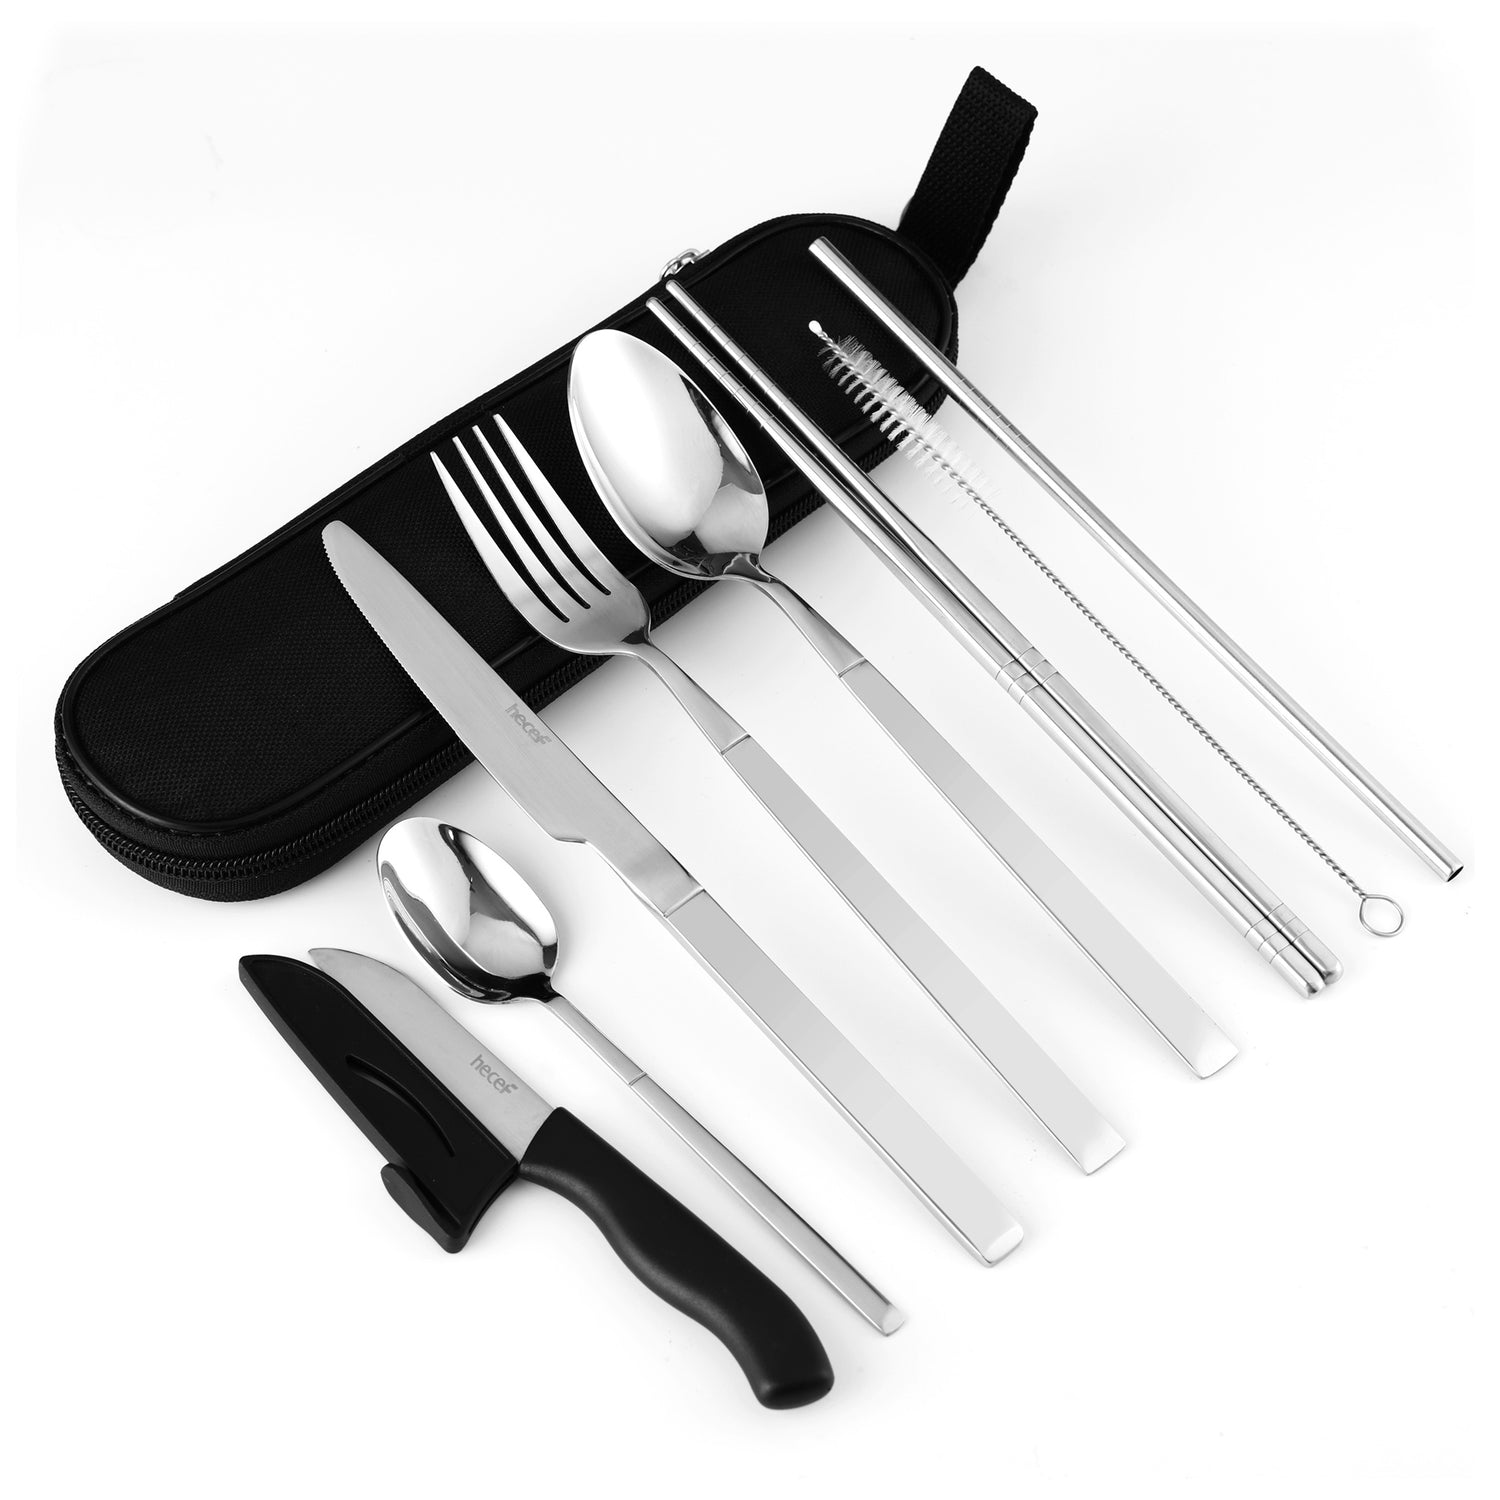 4-piece Portable Stainless Steel Travel Utensils Set with Knife, Fork,  Spoon and Storage Case - Perfect for Office, School, Picnic, Camping and  Outdoor Activities